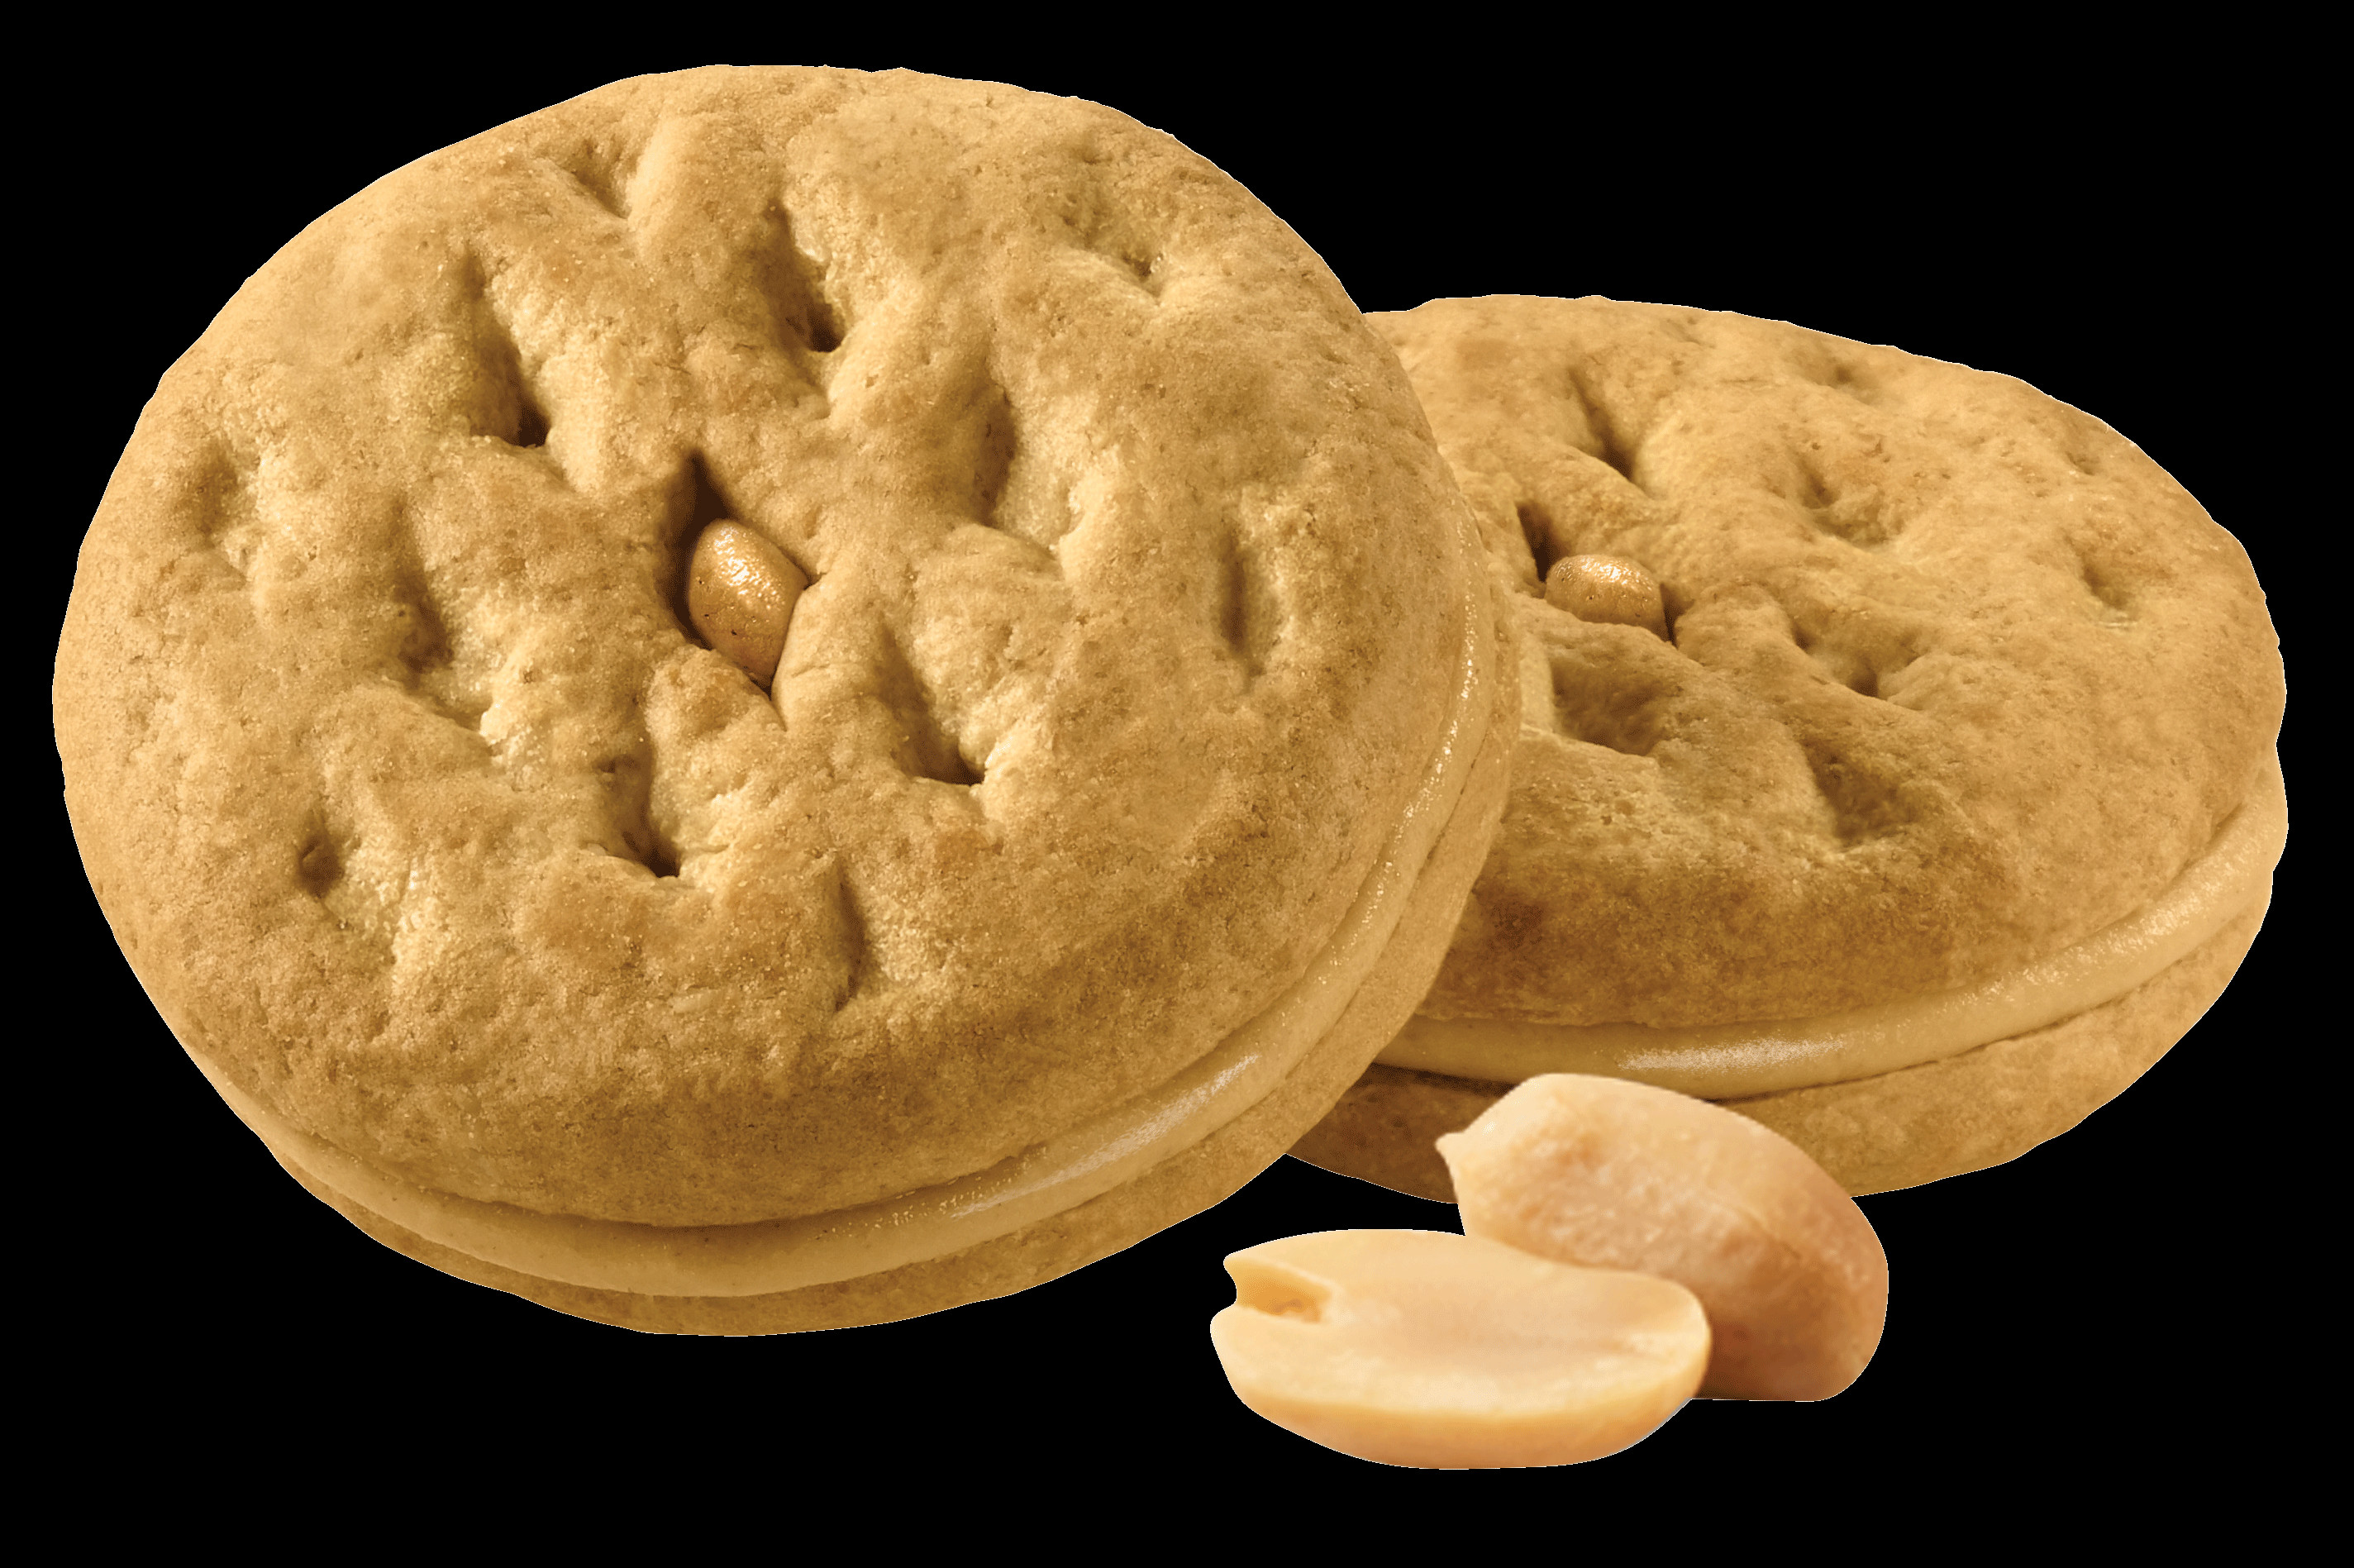 Girl Scouts Cookies Peanut Butter
 Celebrate A Century of Girl Scouts With Our Top 5 Cookie